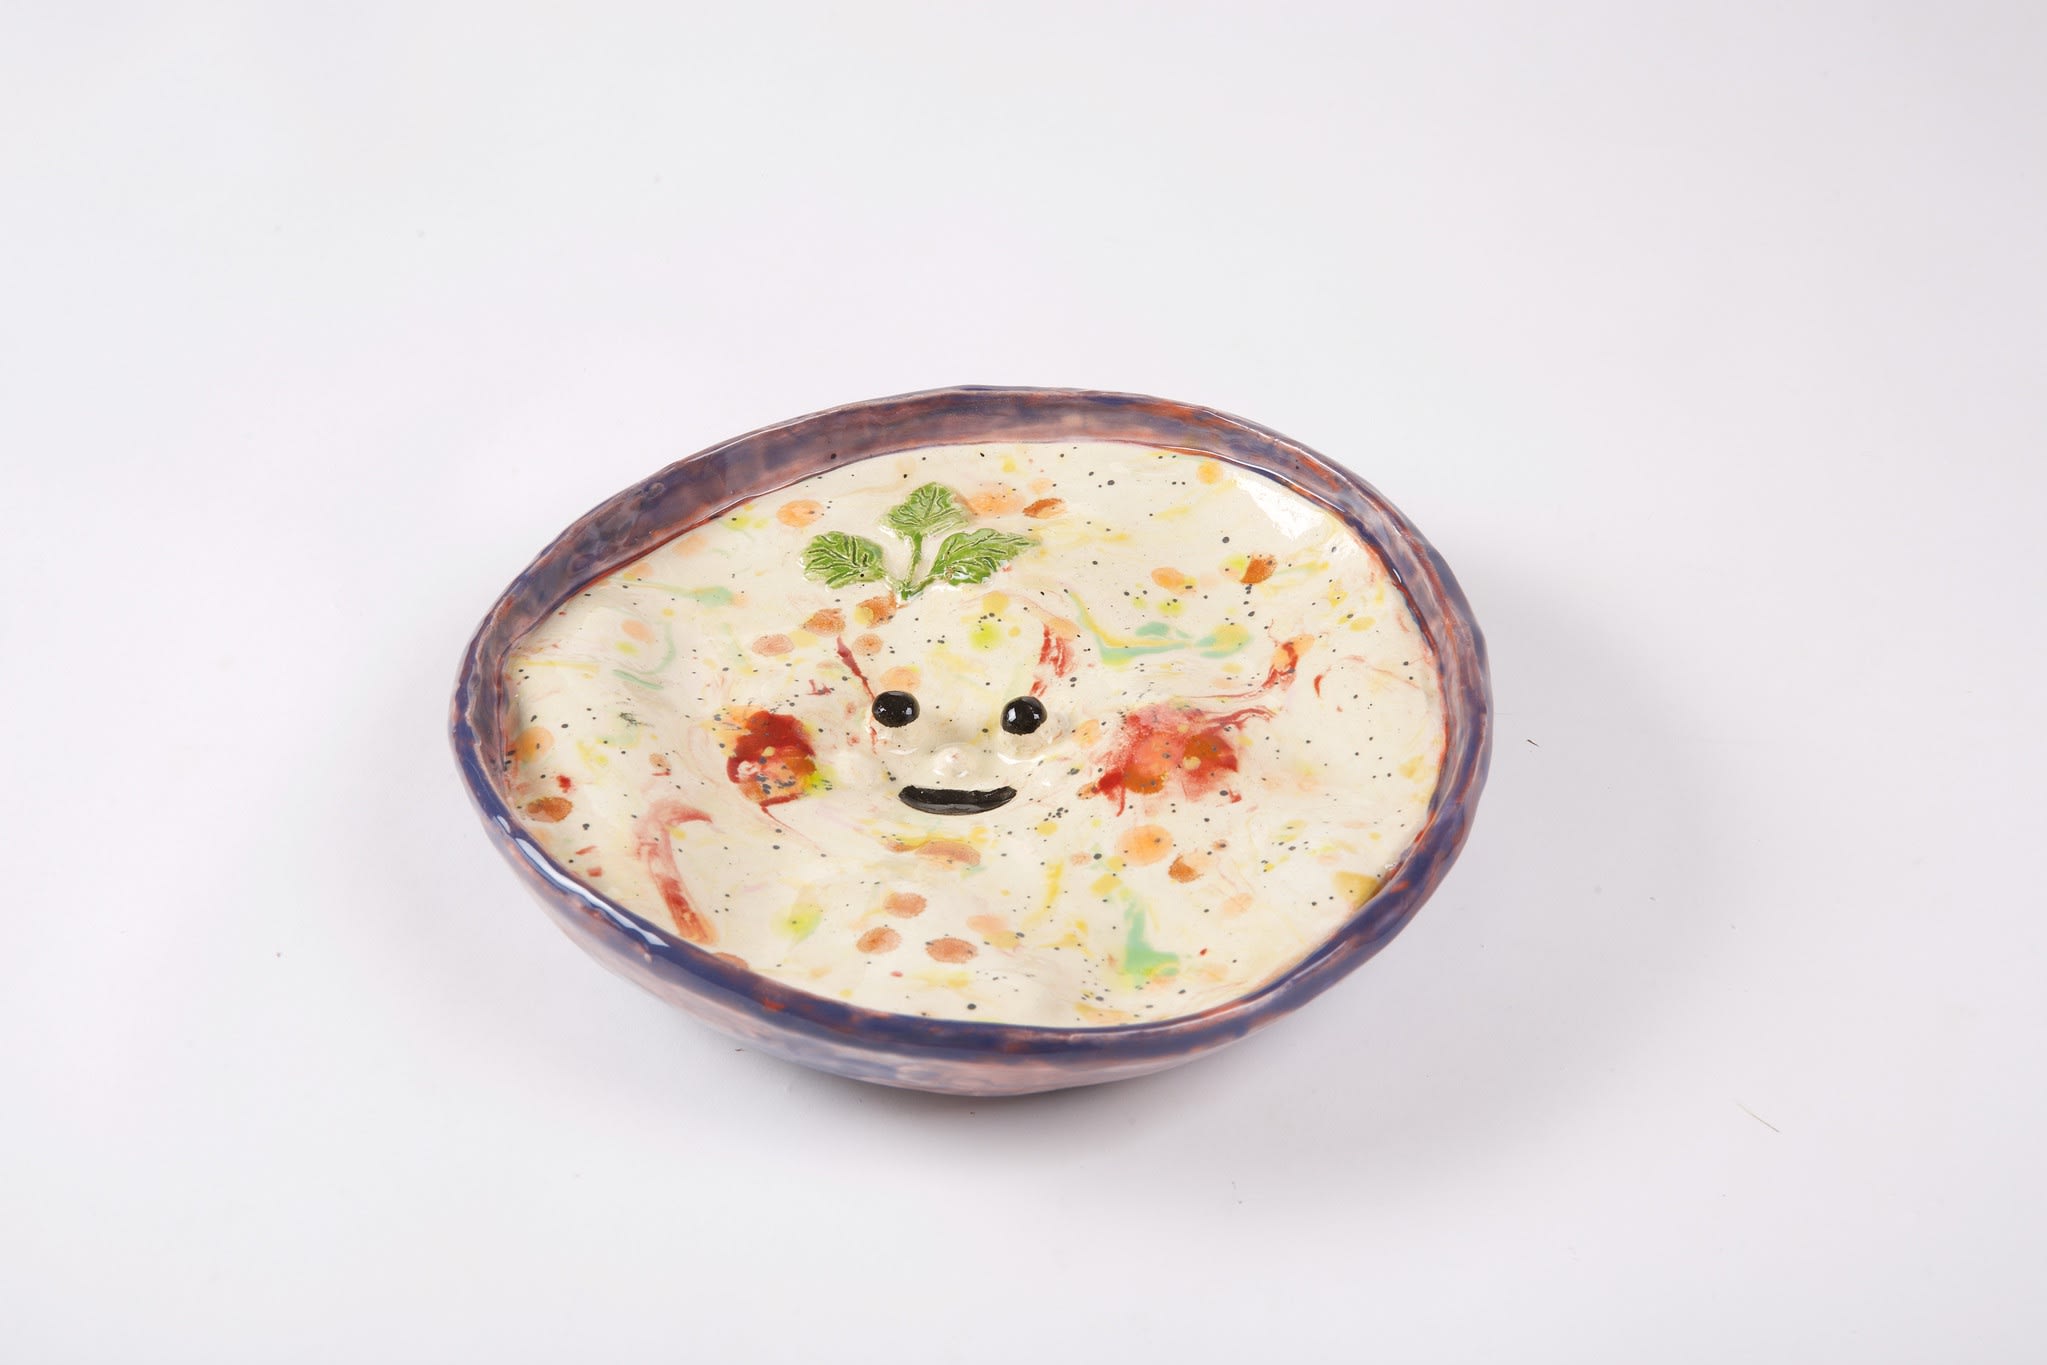 a photo of a sculpture of soup with a face in it 